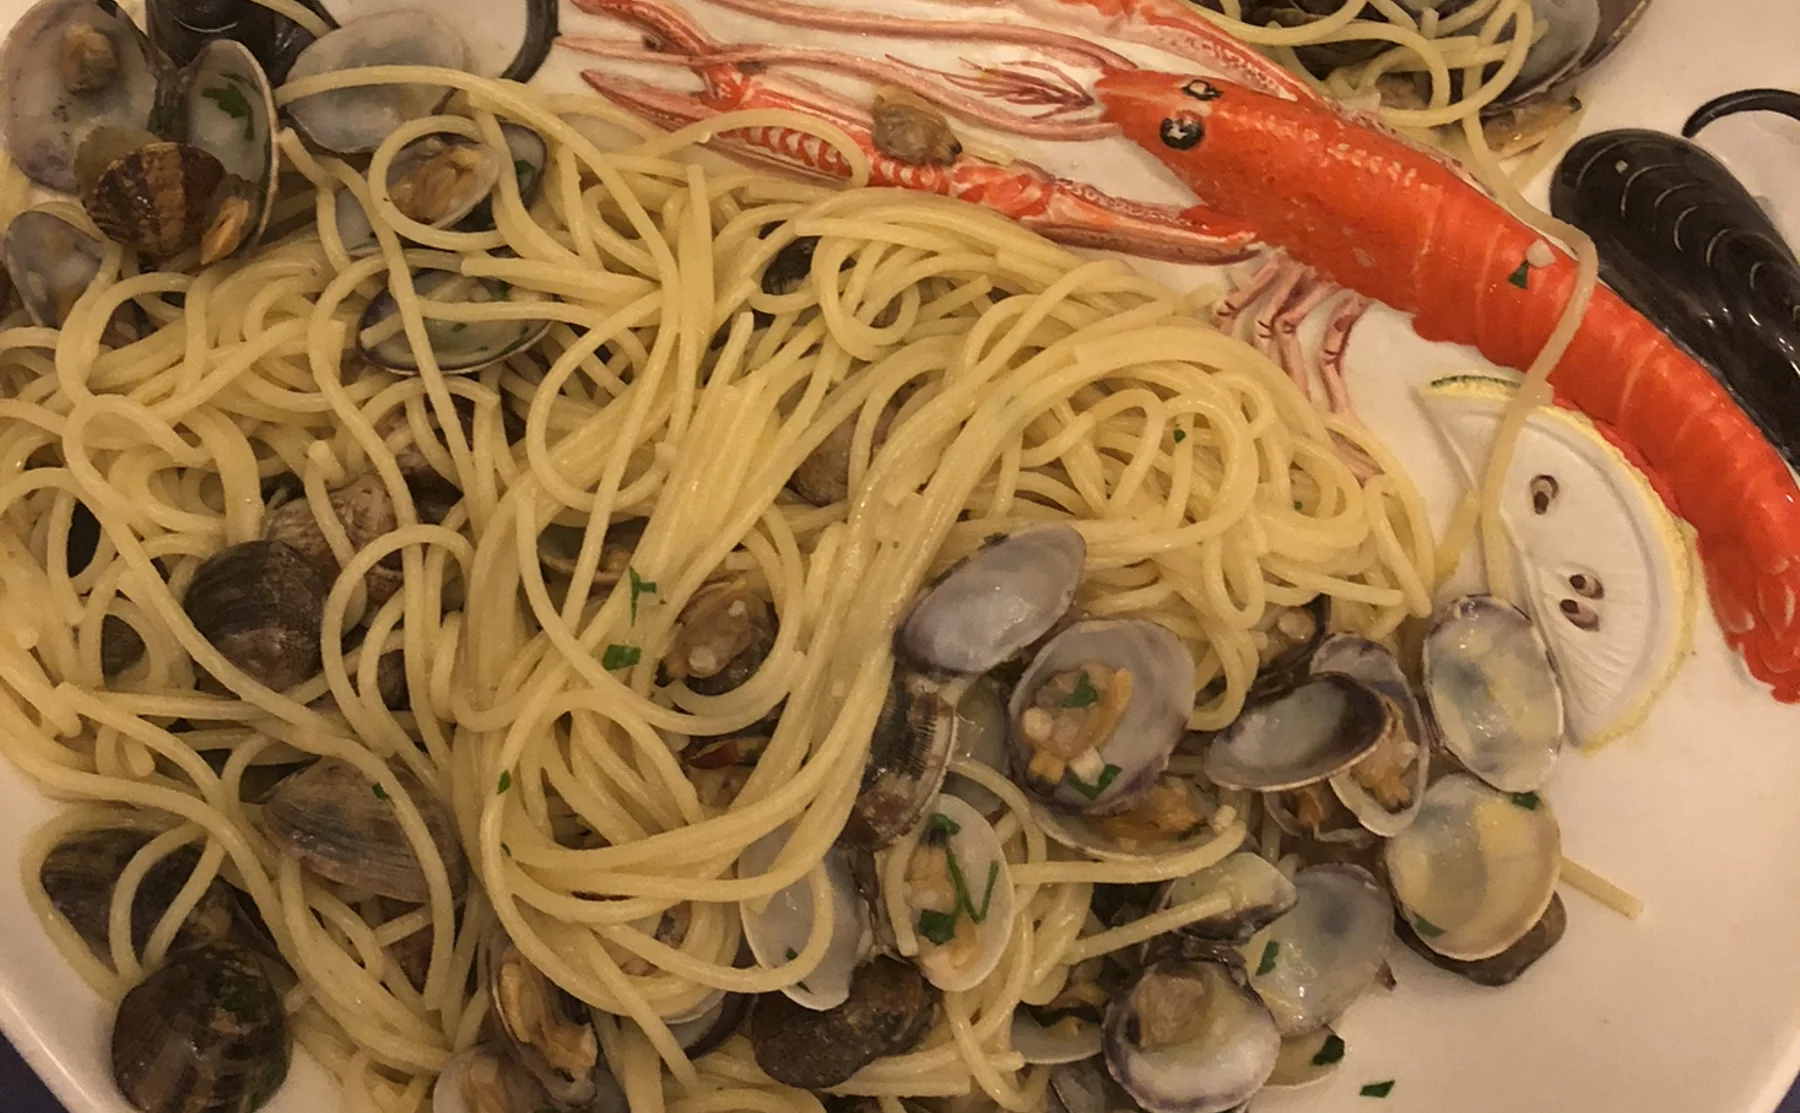 Fish & Seafood dinner in Tuscany's countryside  - 1397433